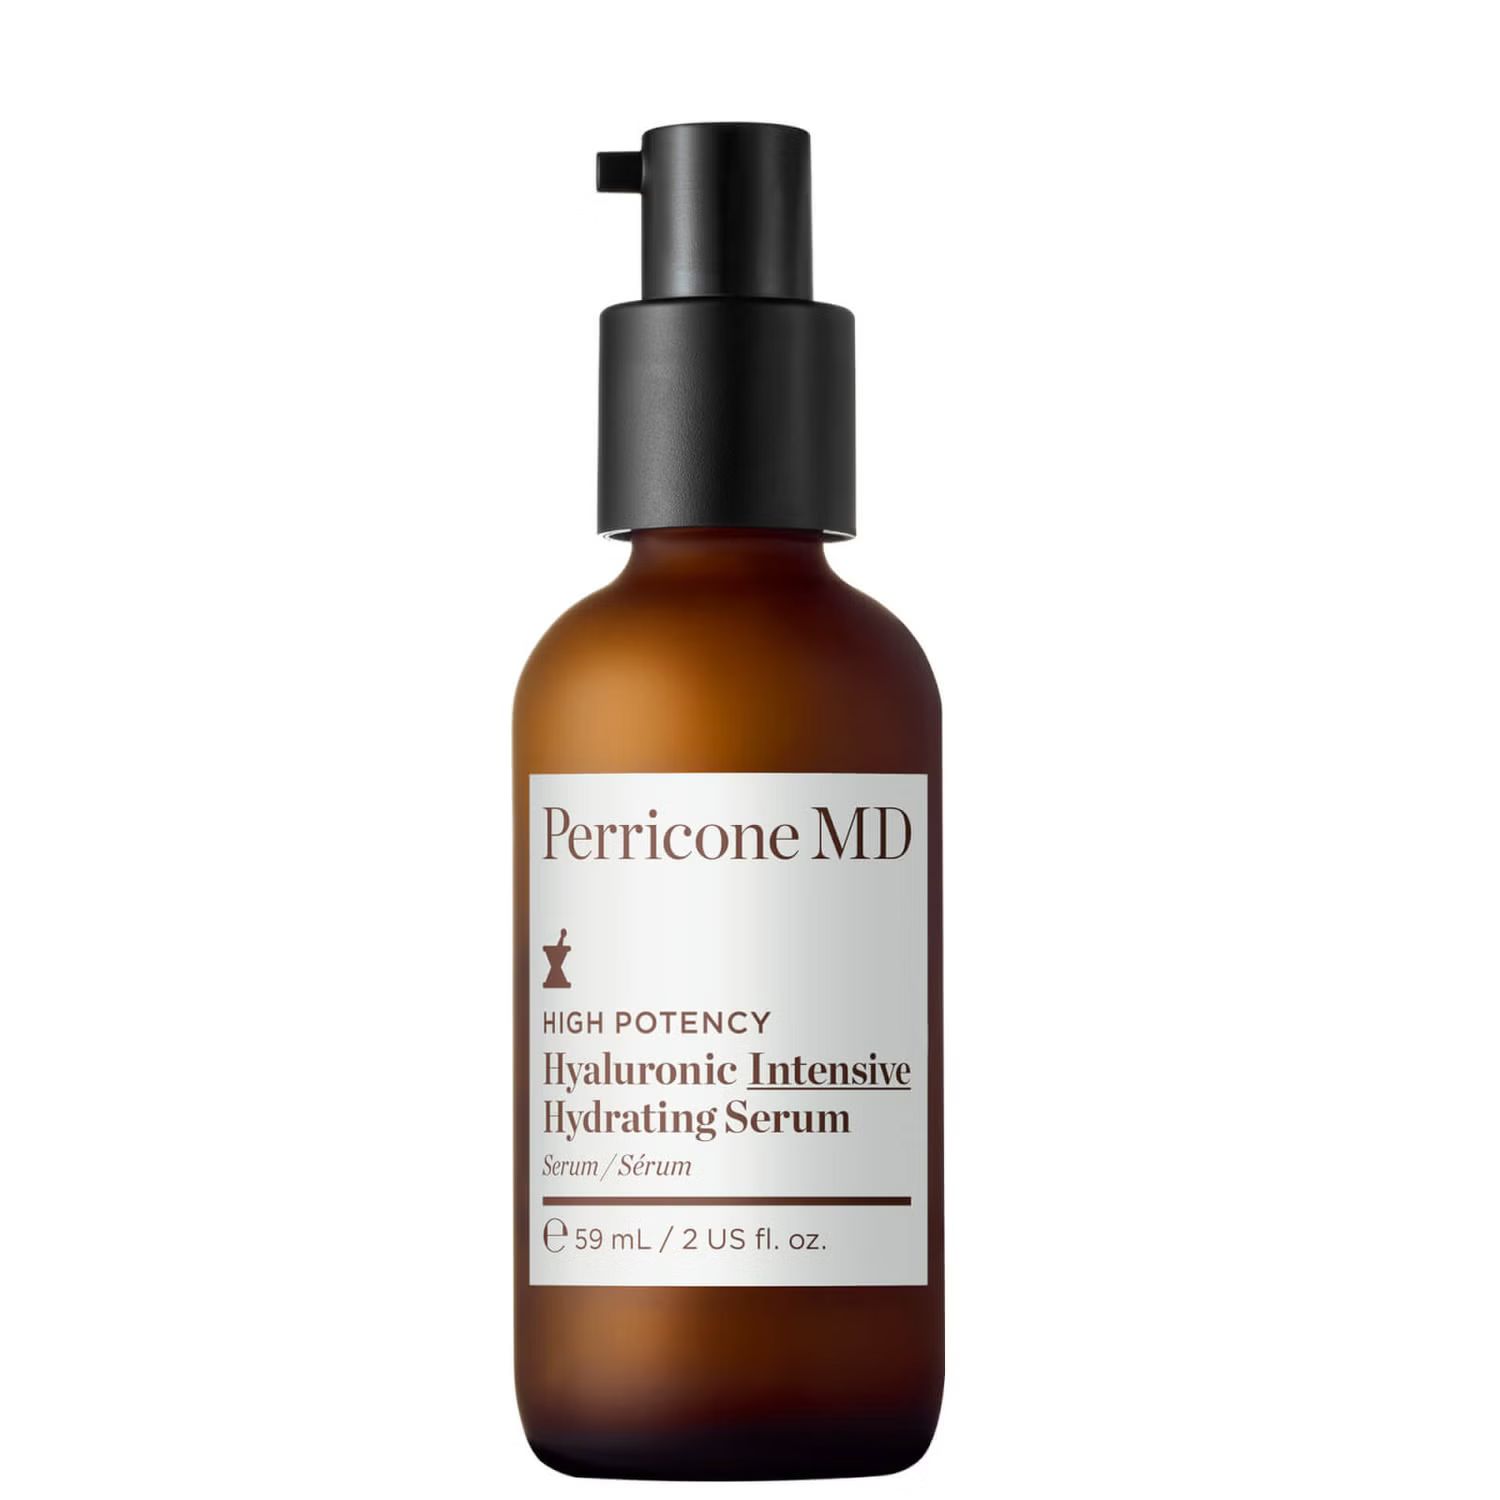 High Potency Hyaluronic Intensive Hydrating Serum | PerriconeMD US